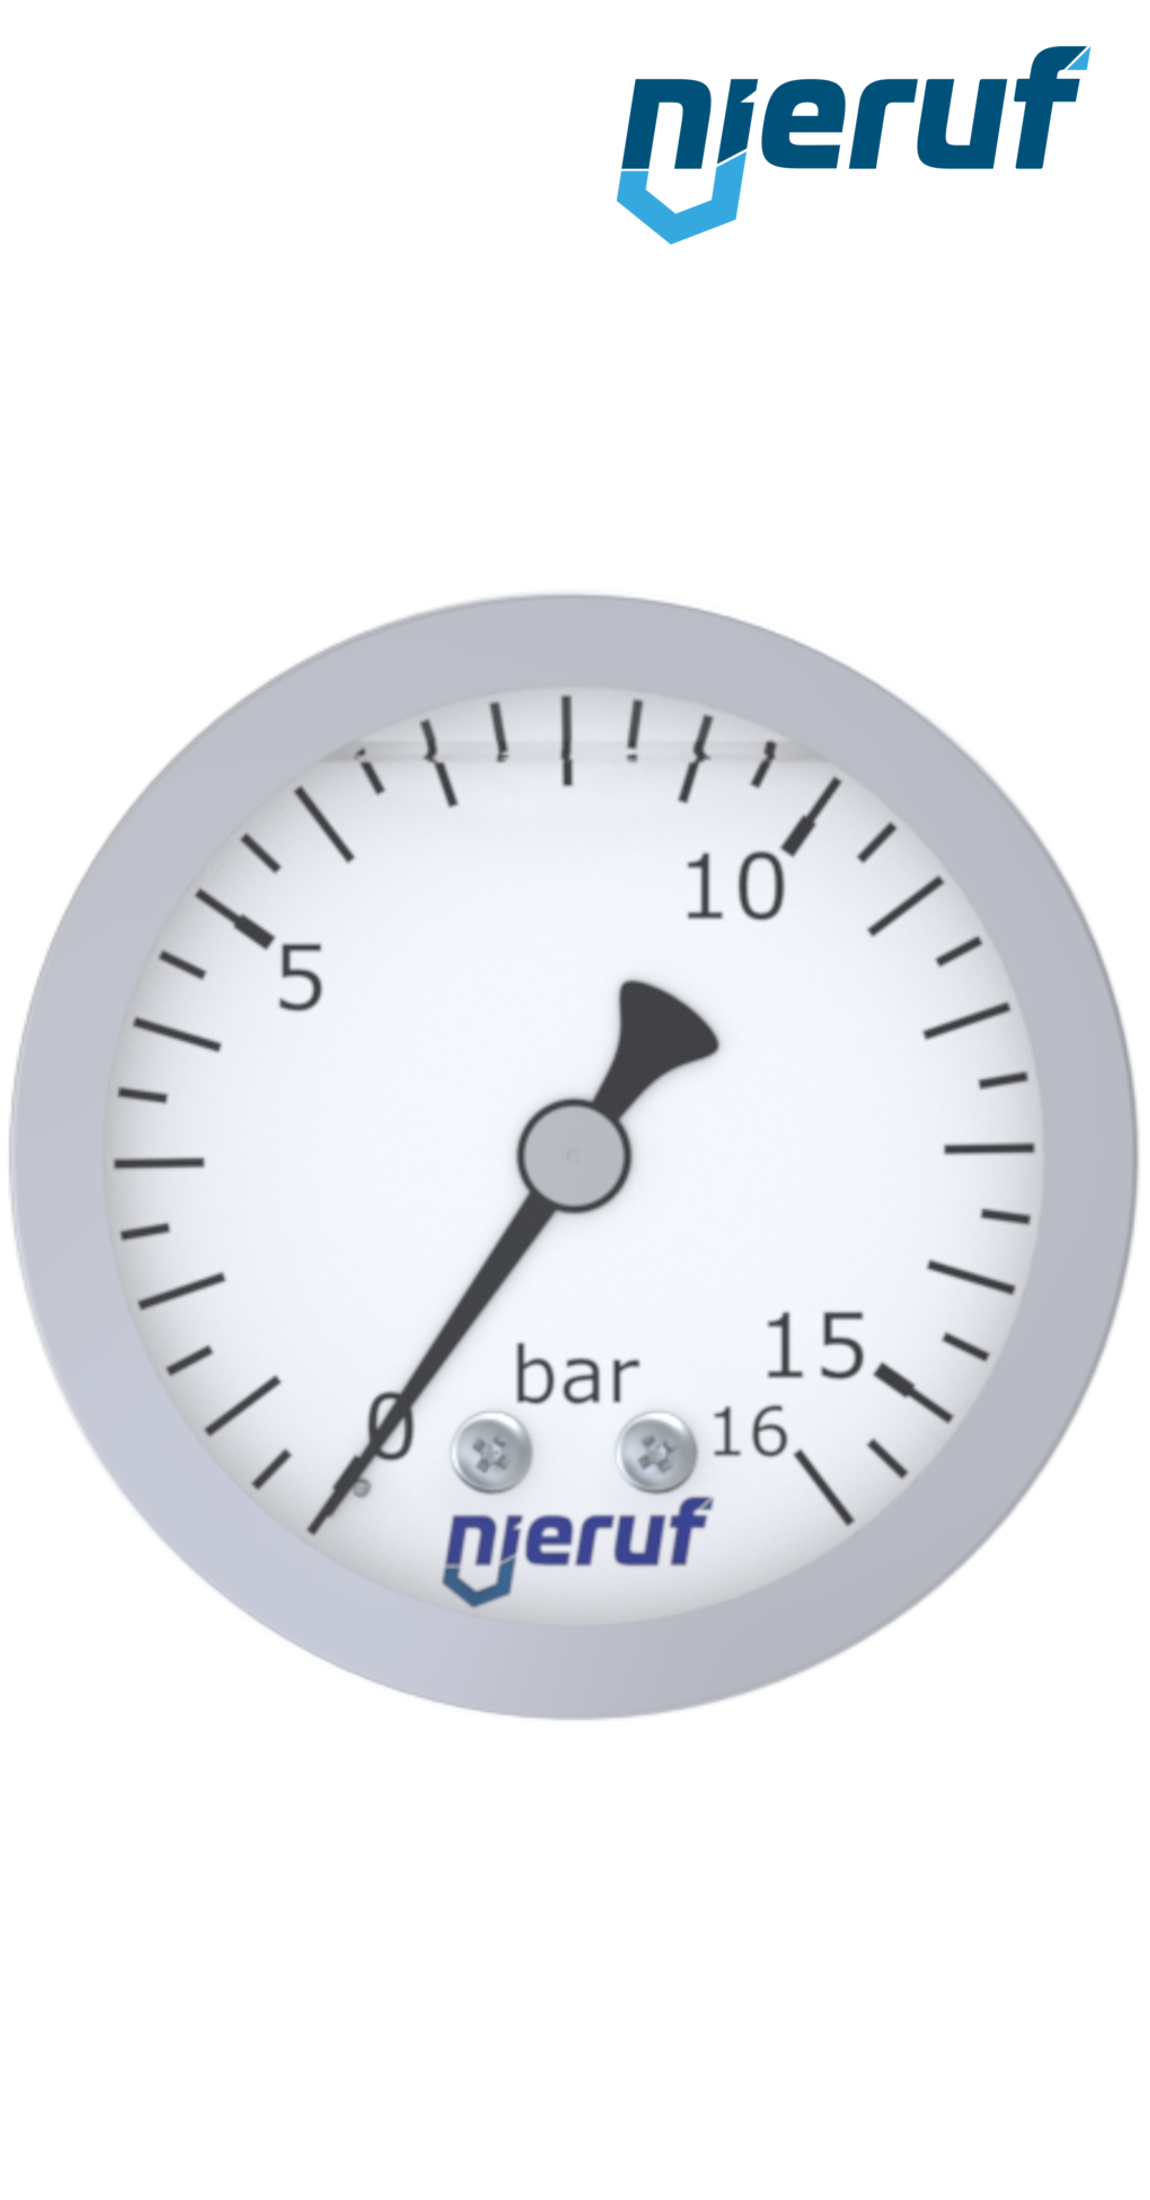 pressure gauge G 1/4" axial 63 mm stainless steel MM06 0 - 10,0 bar with glycerin filling